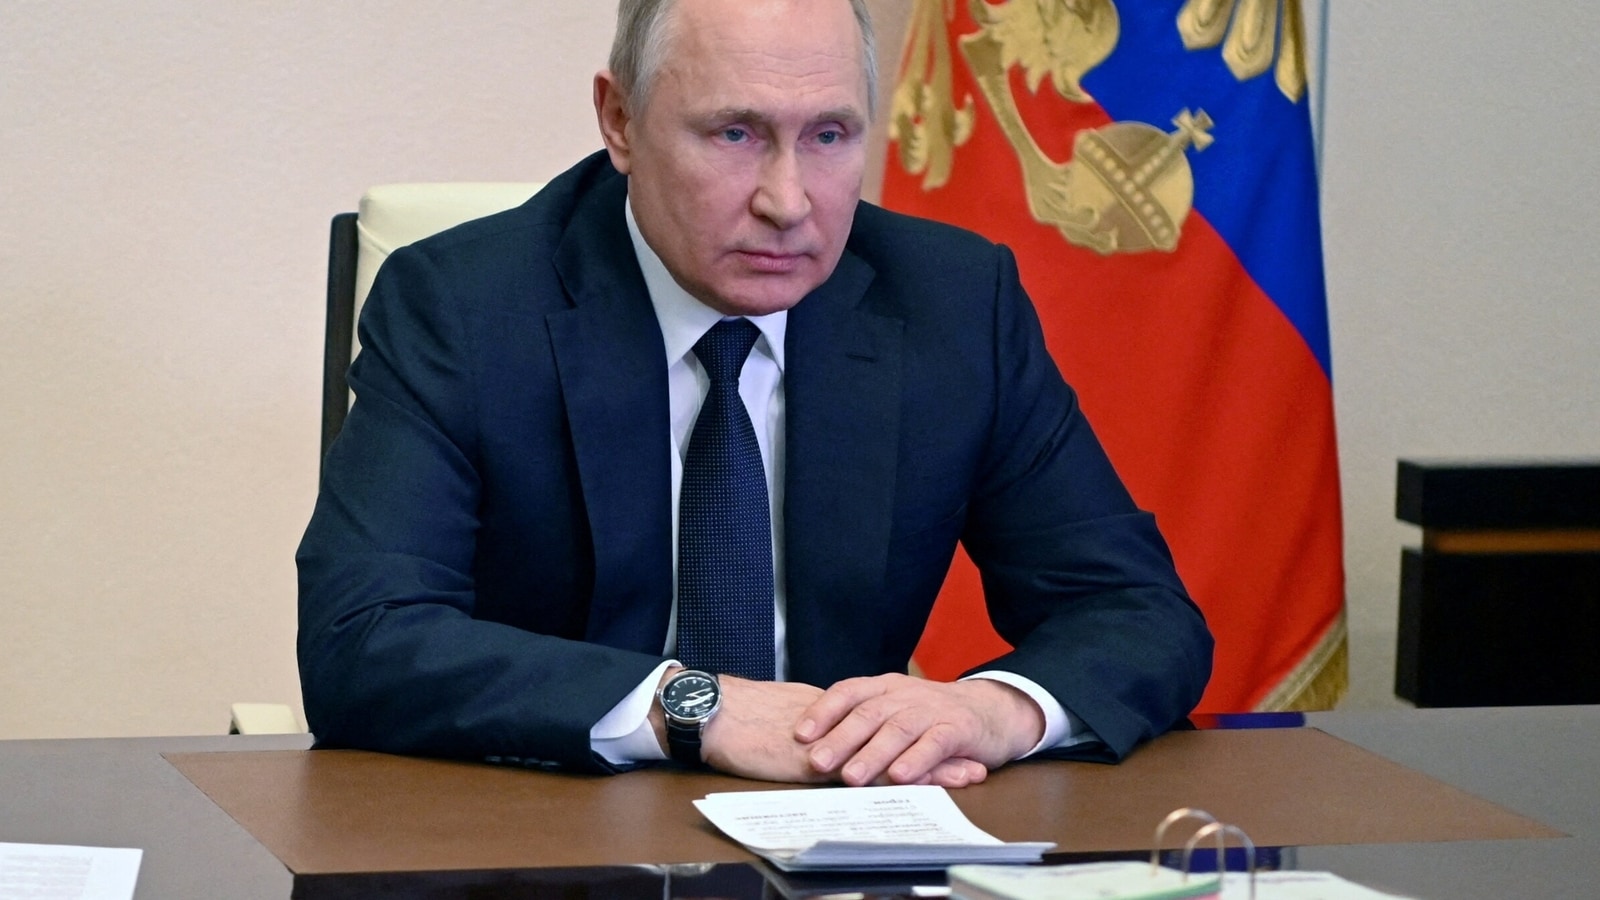 How Can the New Cold War with Russia End? By Paul R. Pillar